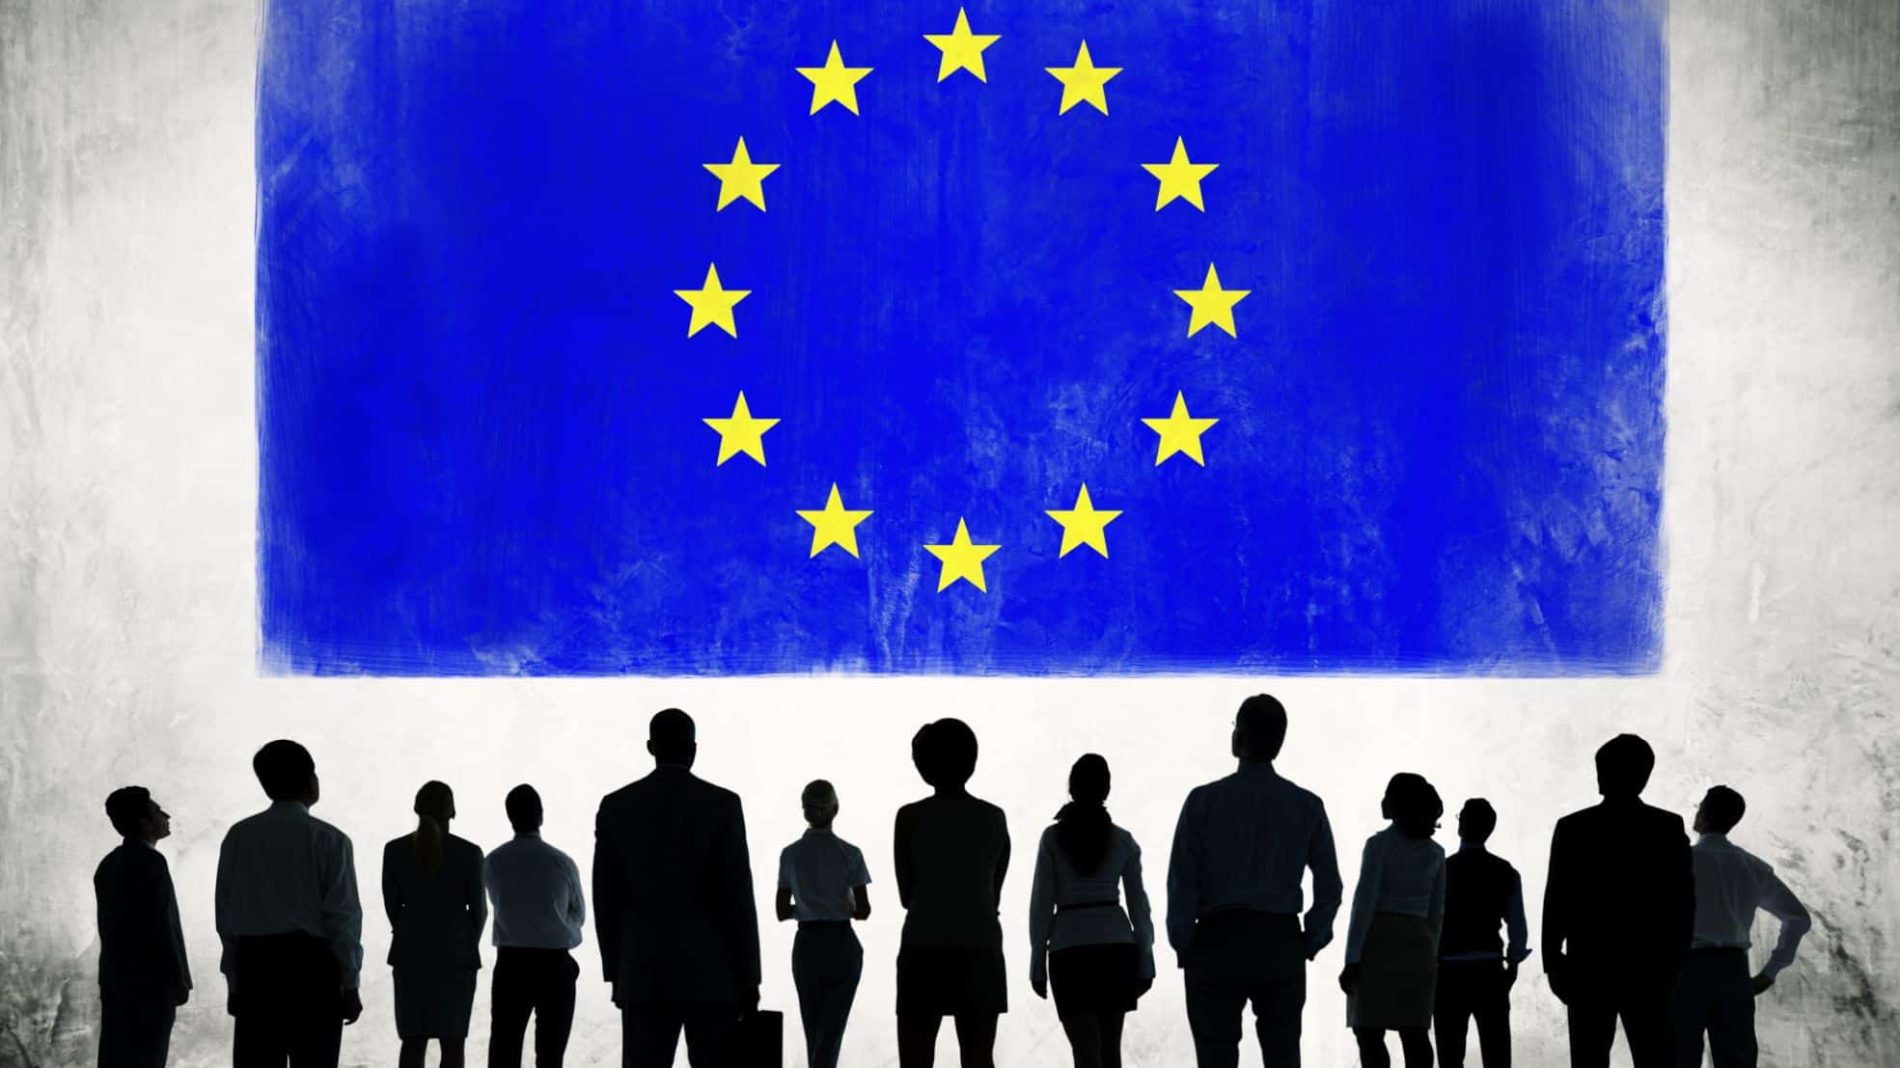 EU flag with employee silhouettes in front of it